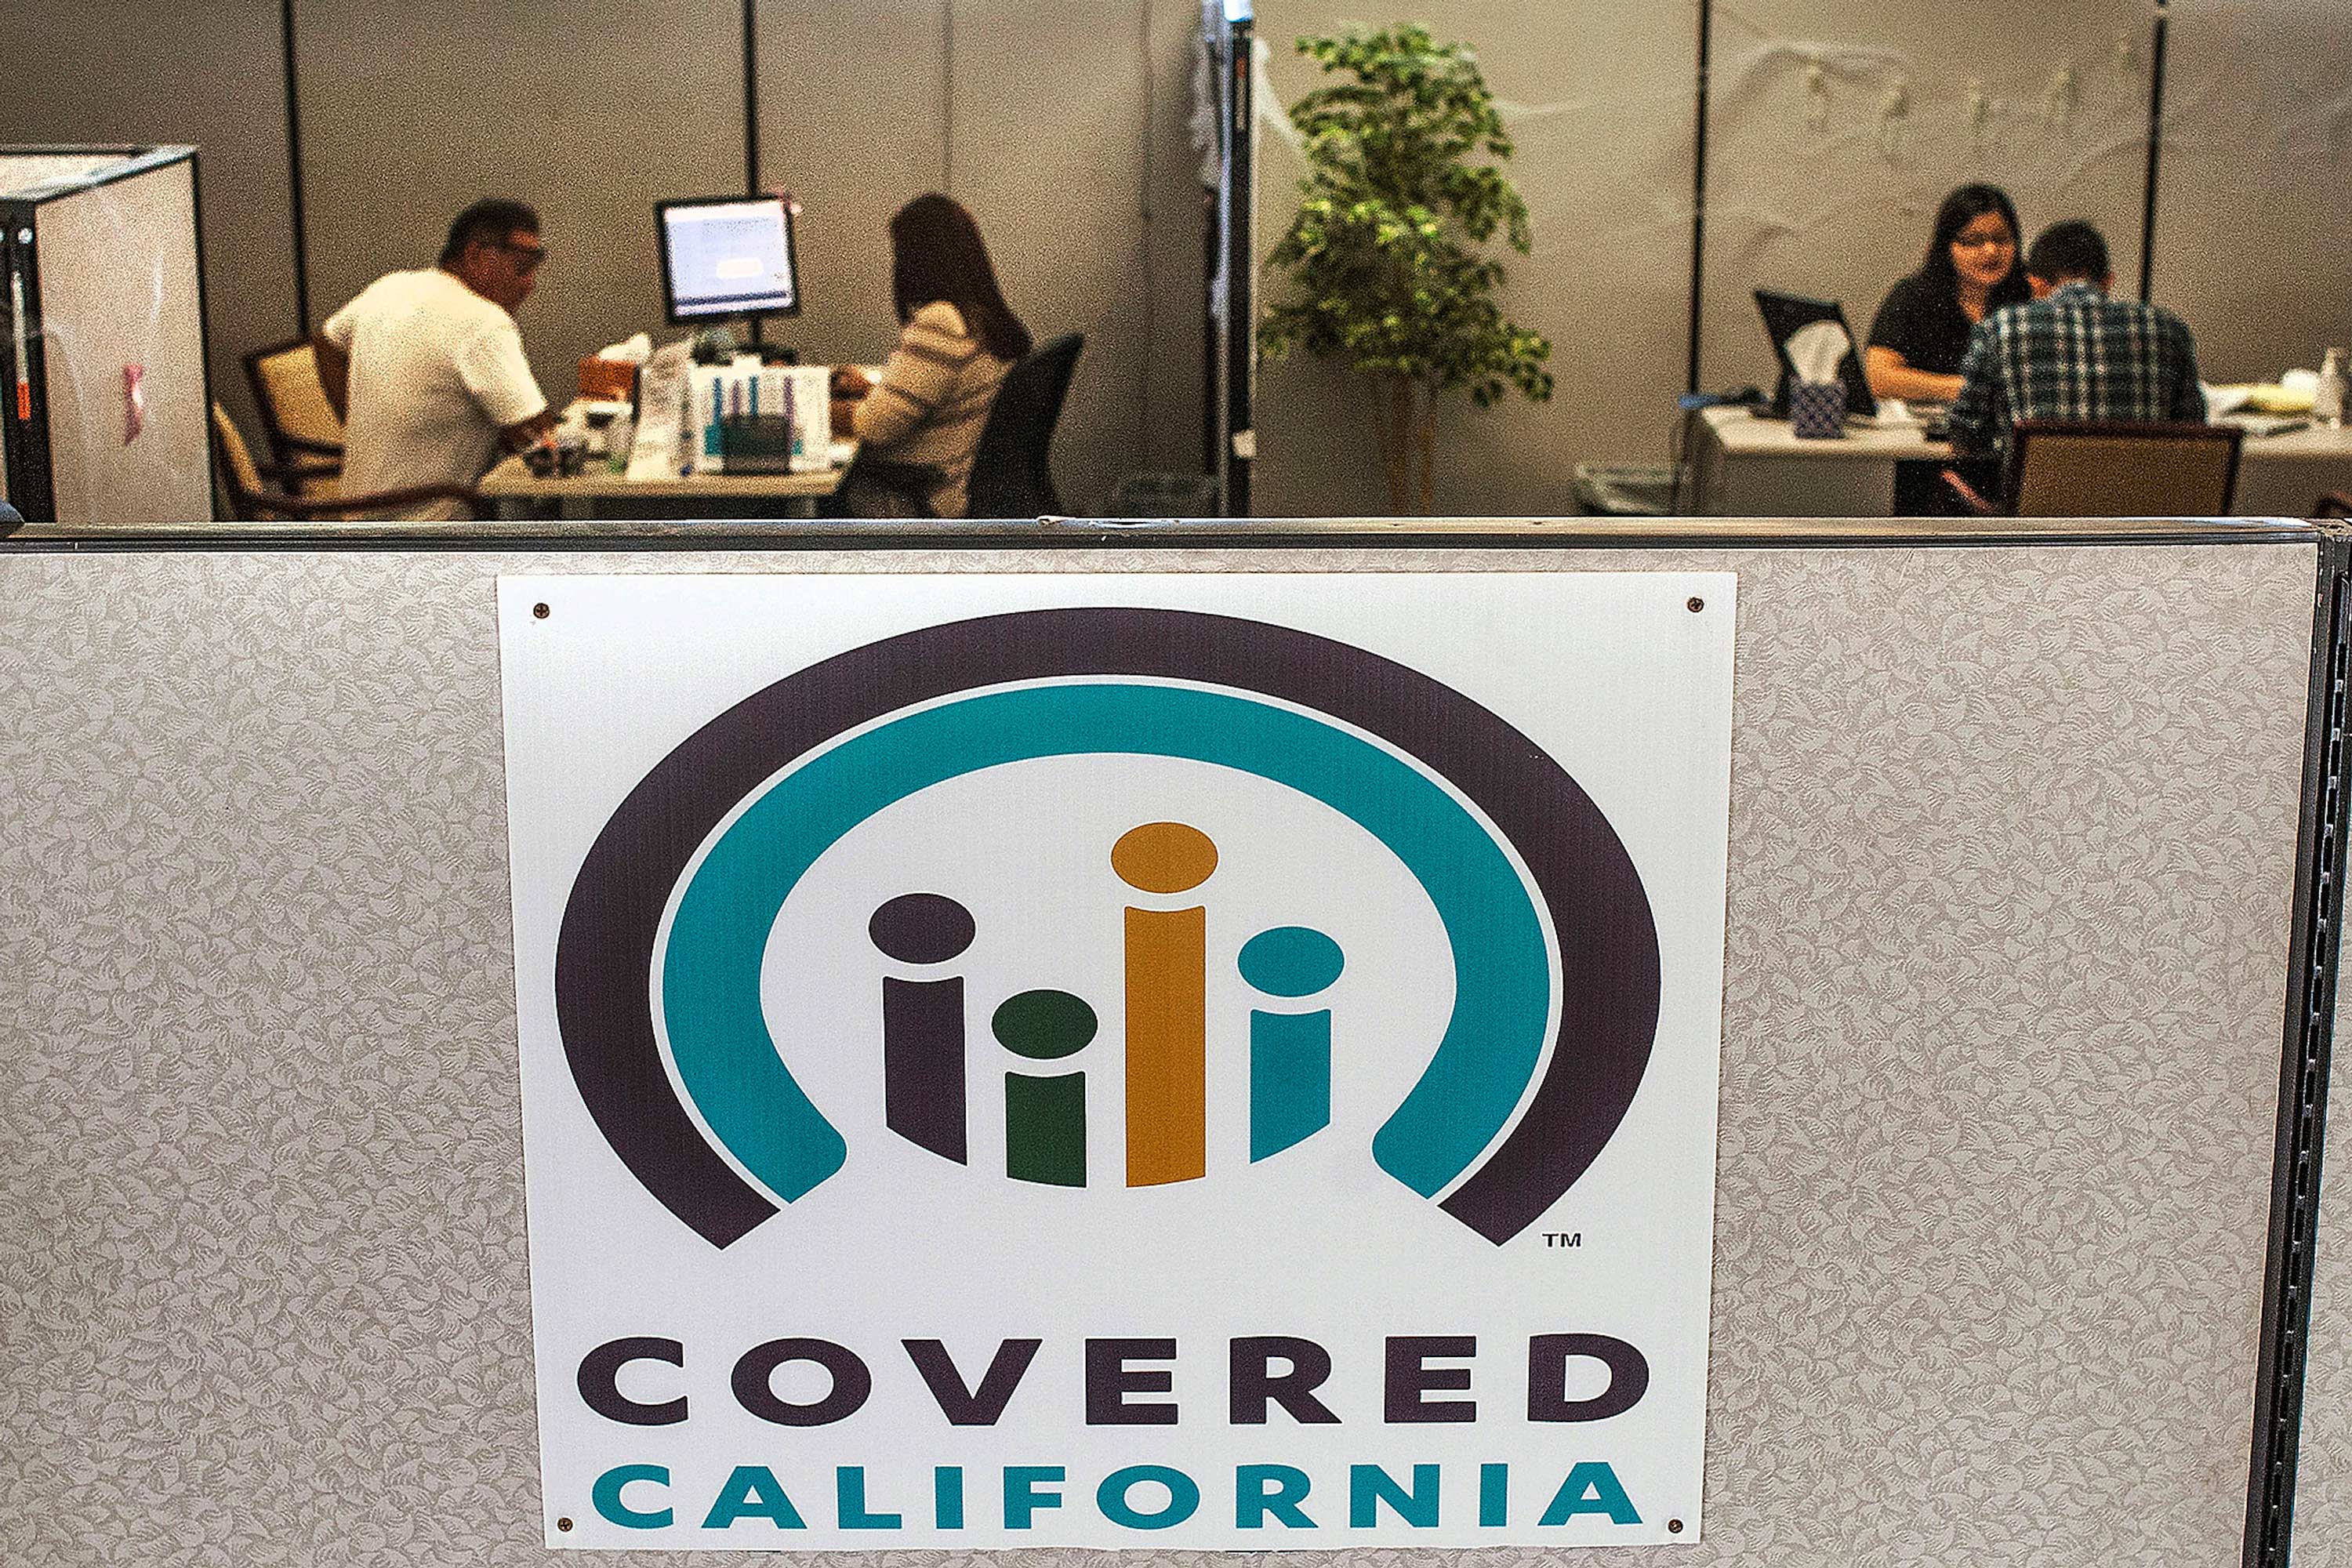 The "Covered California" logo seen on an office cubicle.